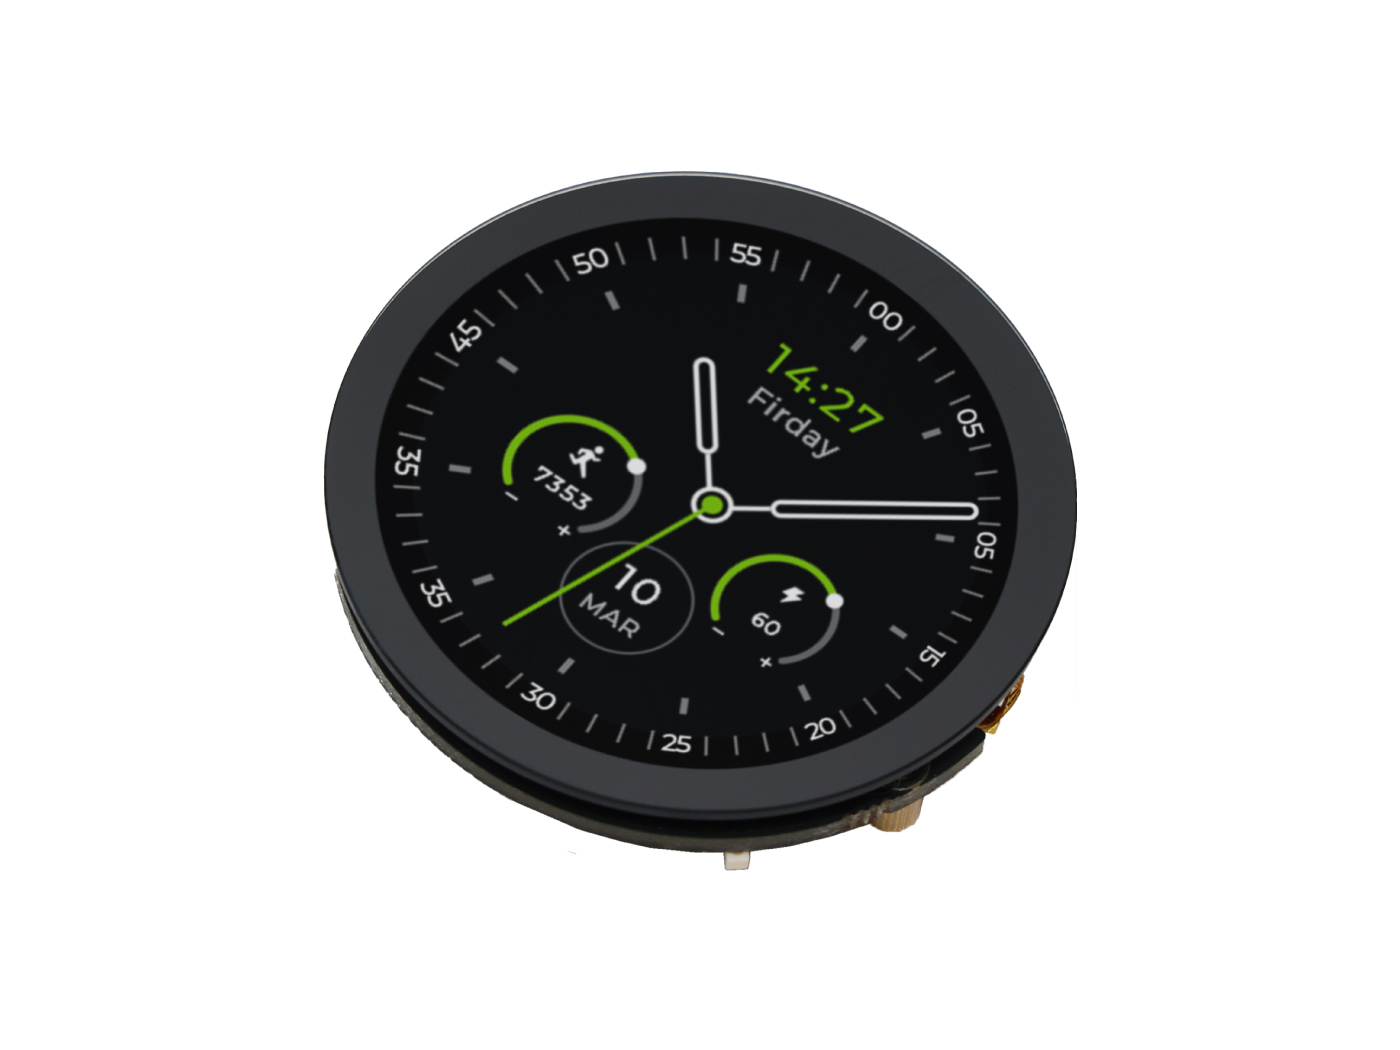 [104030087]Seeed Studio Round Display for XIAO - 1.28-inch round touch screen, 240×240 resolution, 65k colors,  RTC, charge IC, TF card slot, JST 1.25 connector,  All XIAO Compatible,HMI, Smart Home, Wearables 